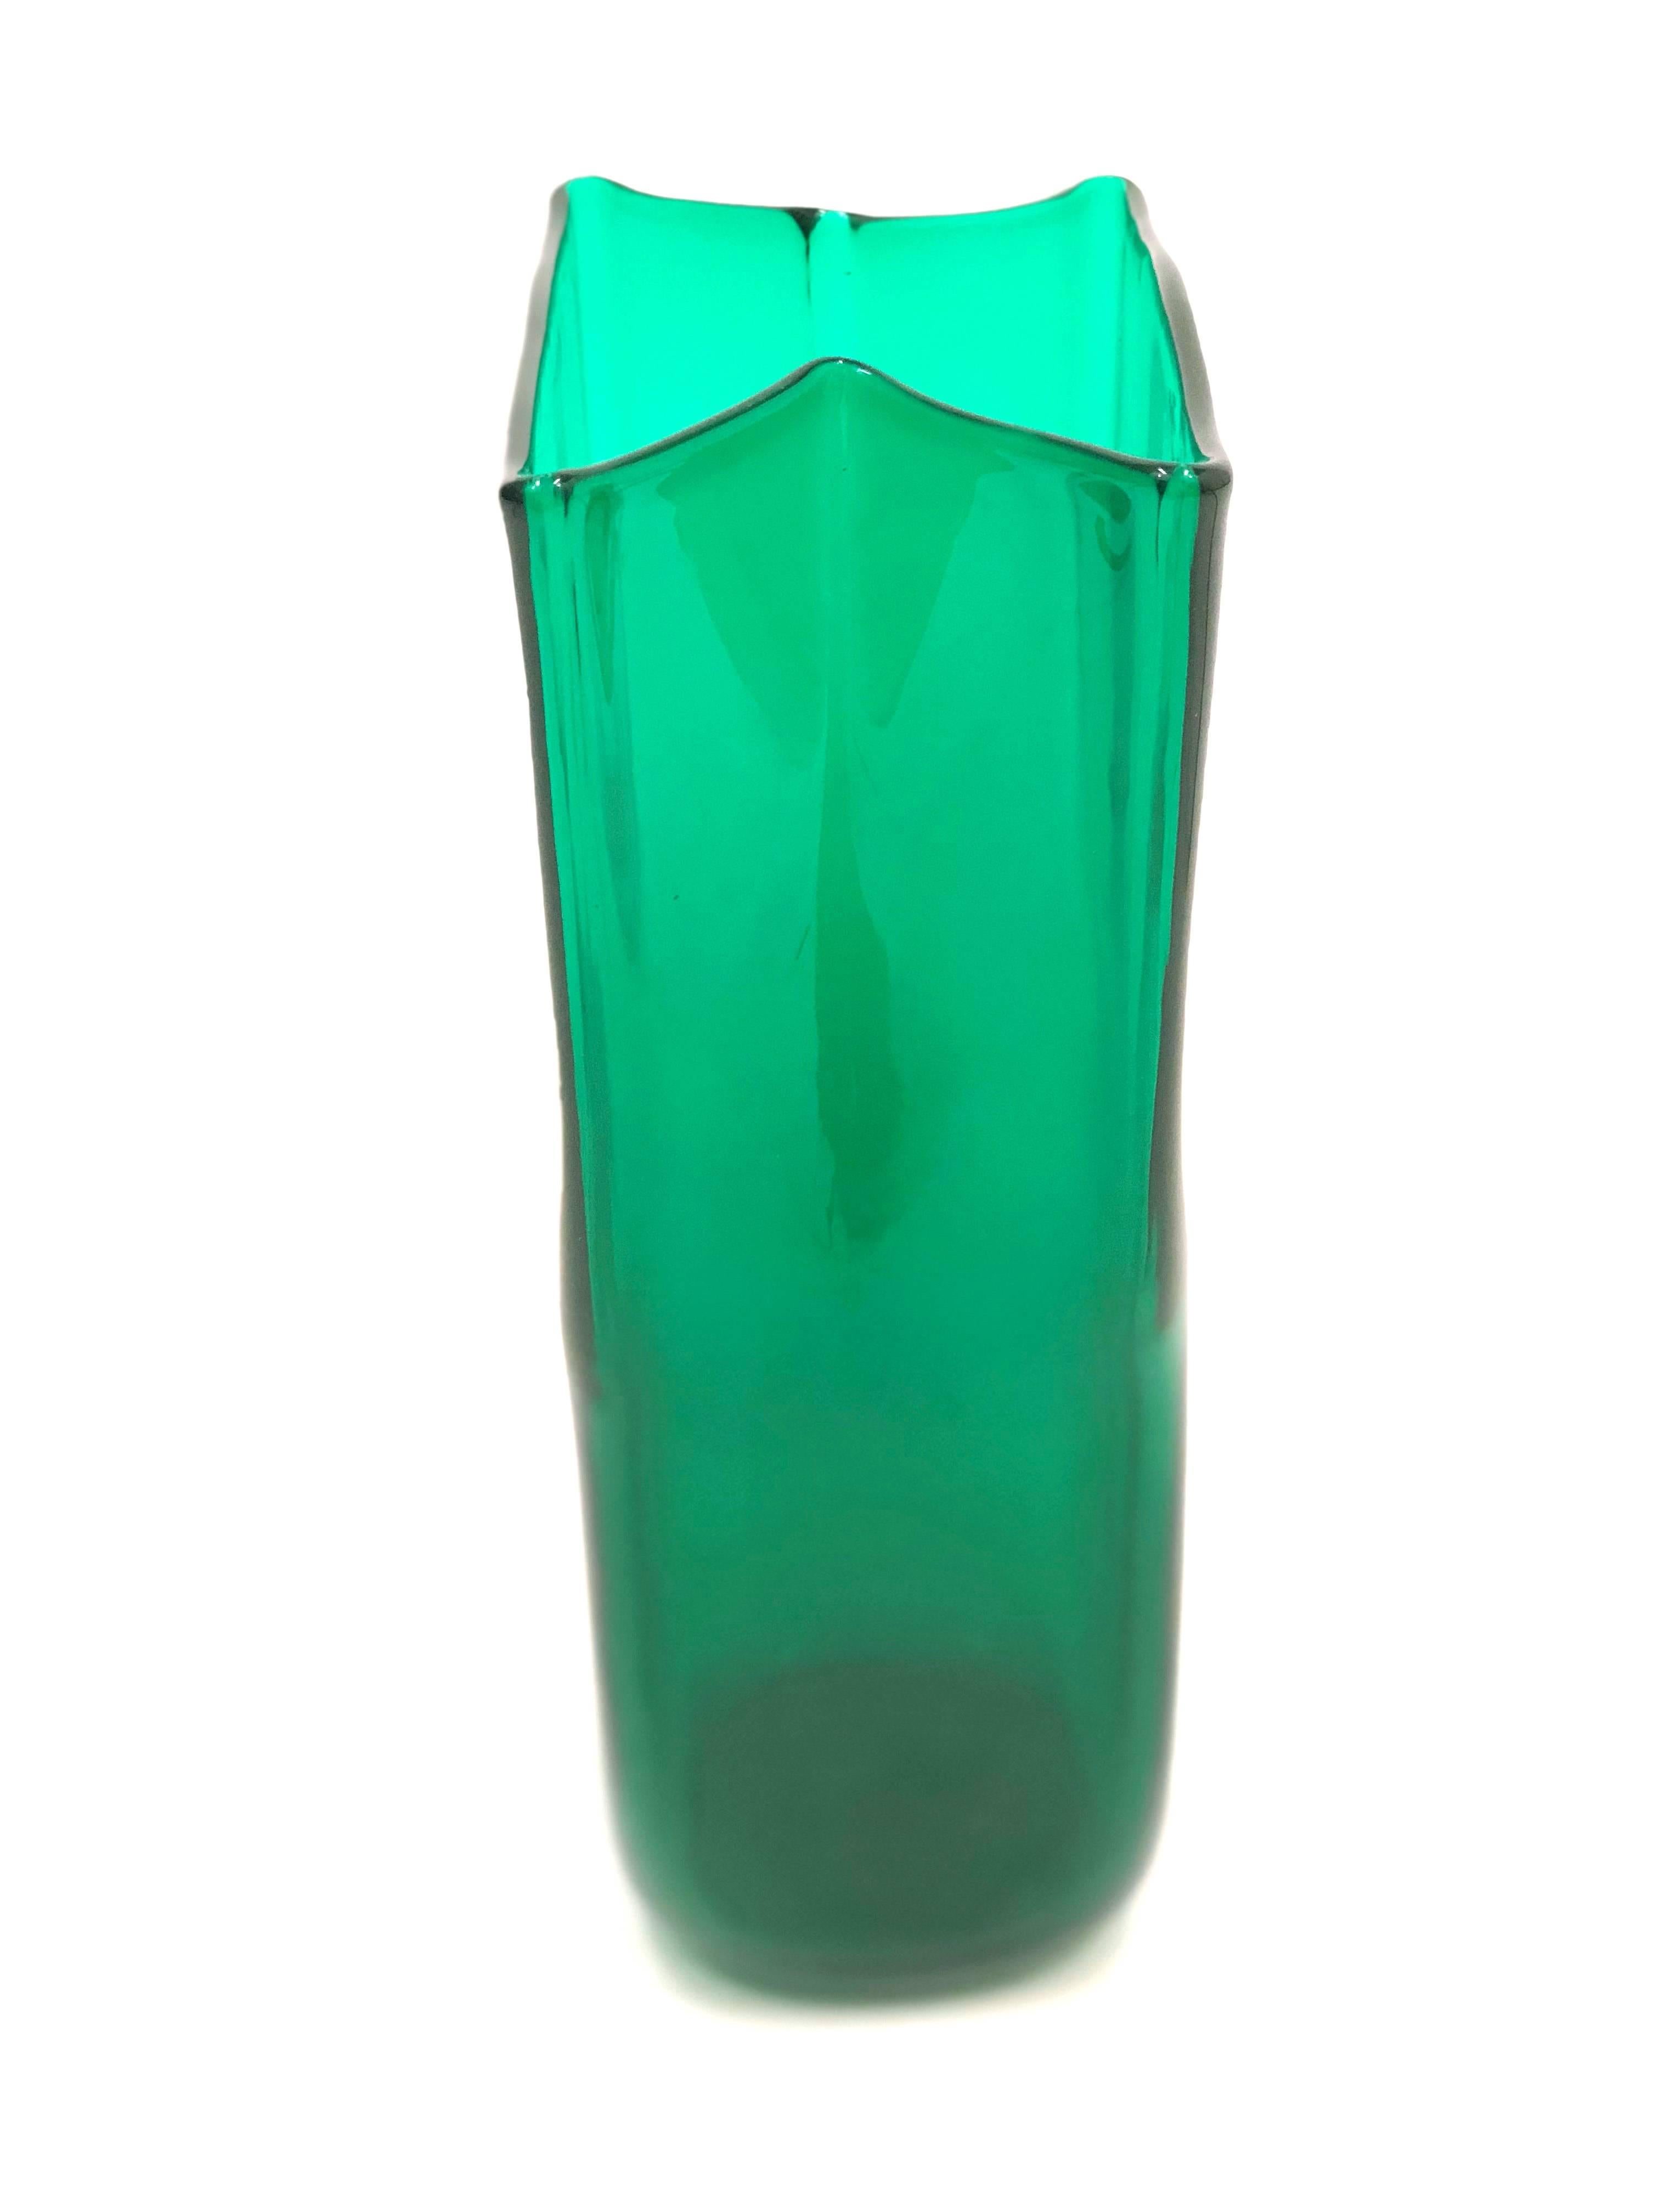 Midcentury Green Folded Glass Vase by Don Shepherd for Blenko In Good Condition For Sale In Portland, OR